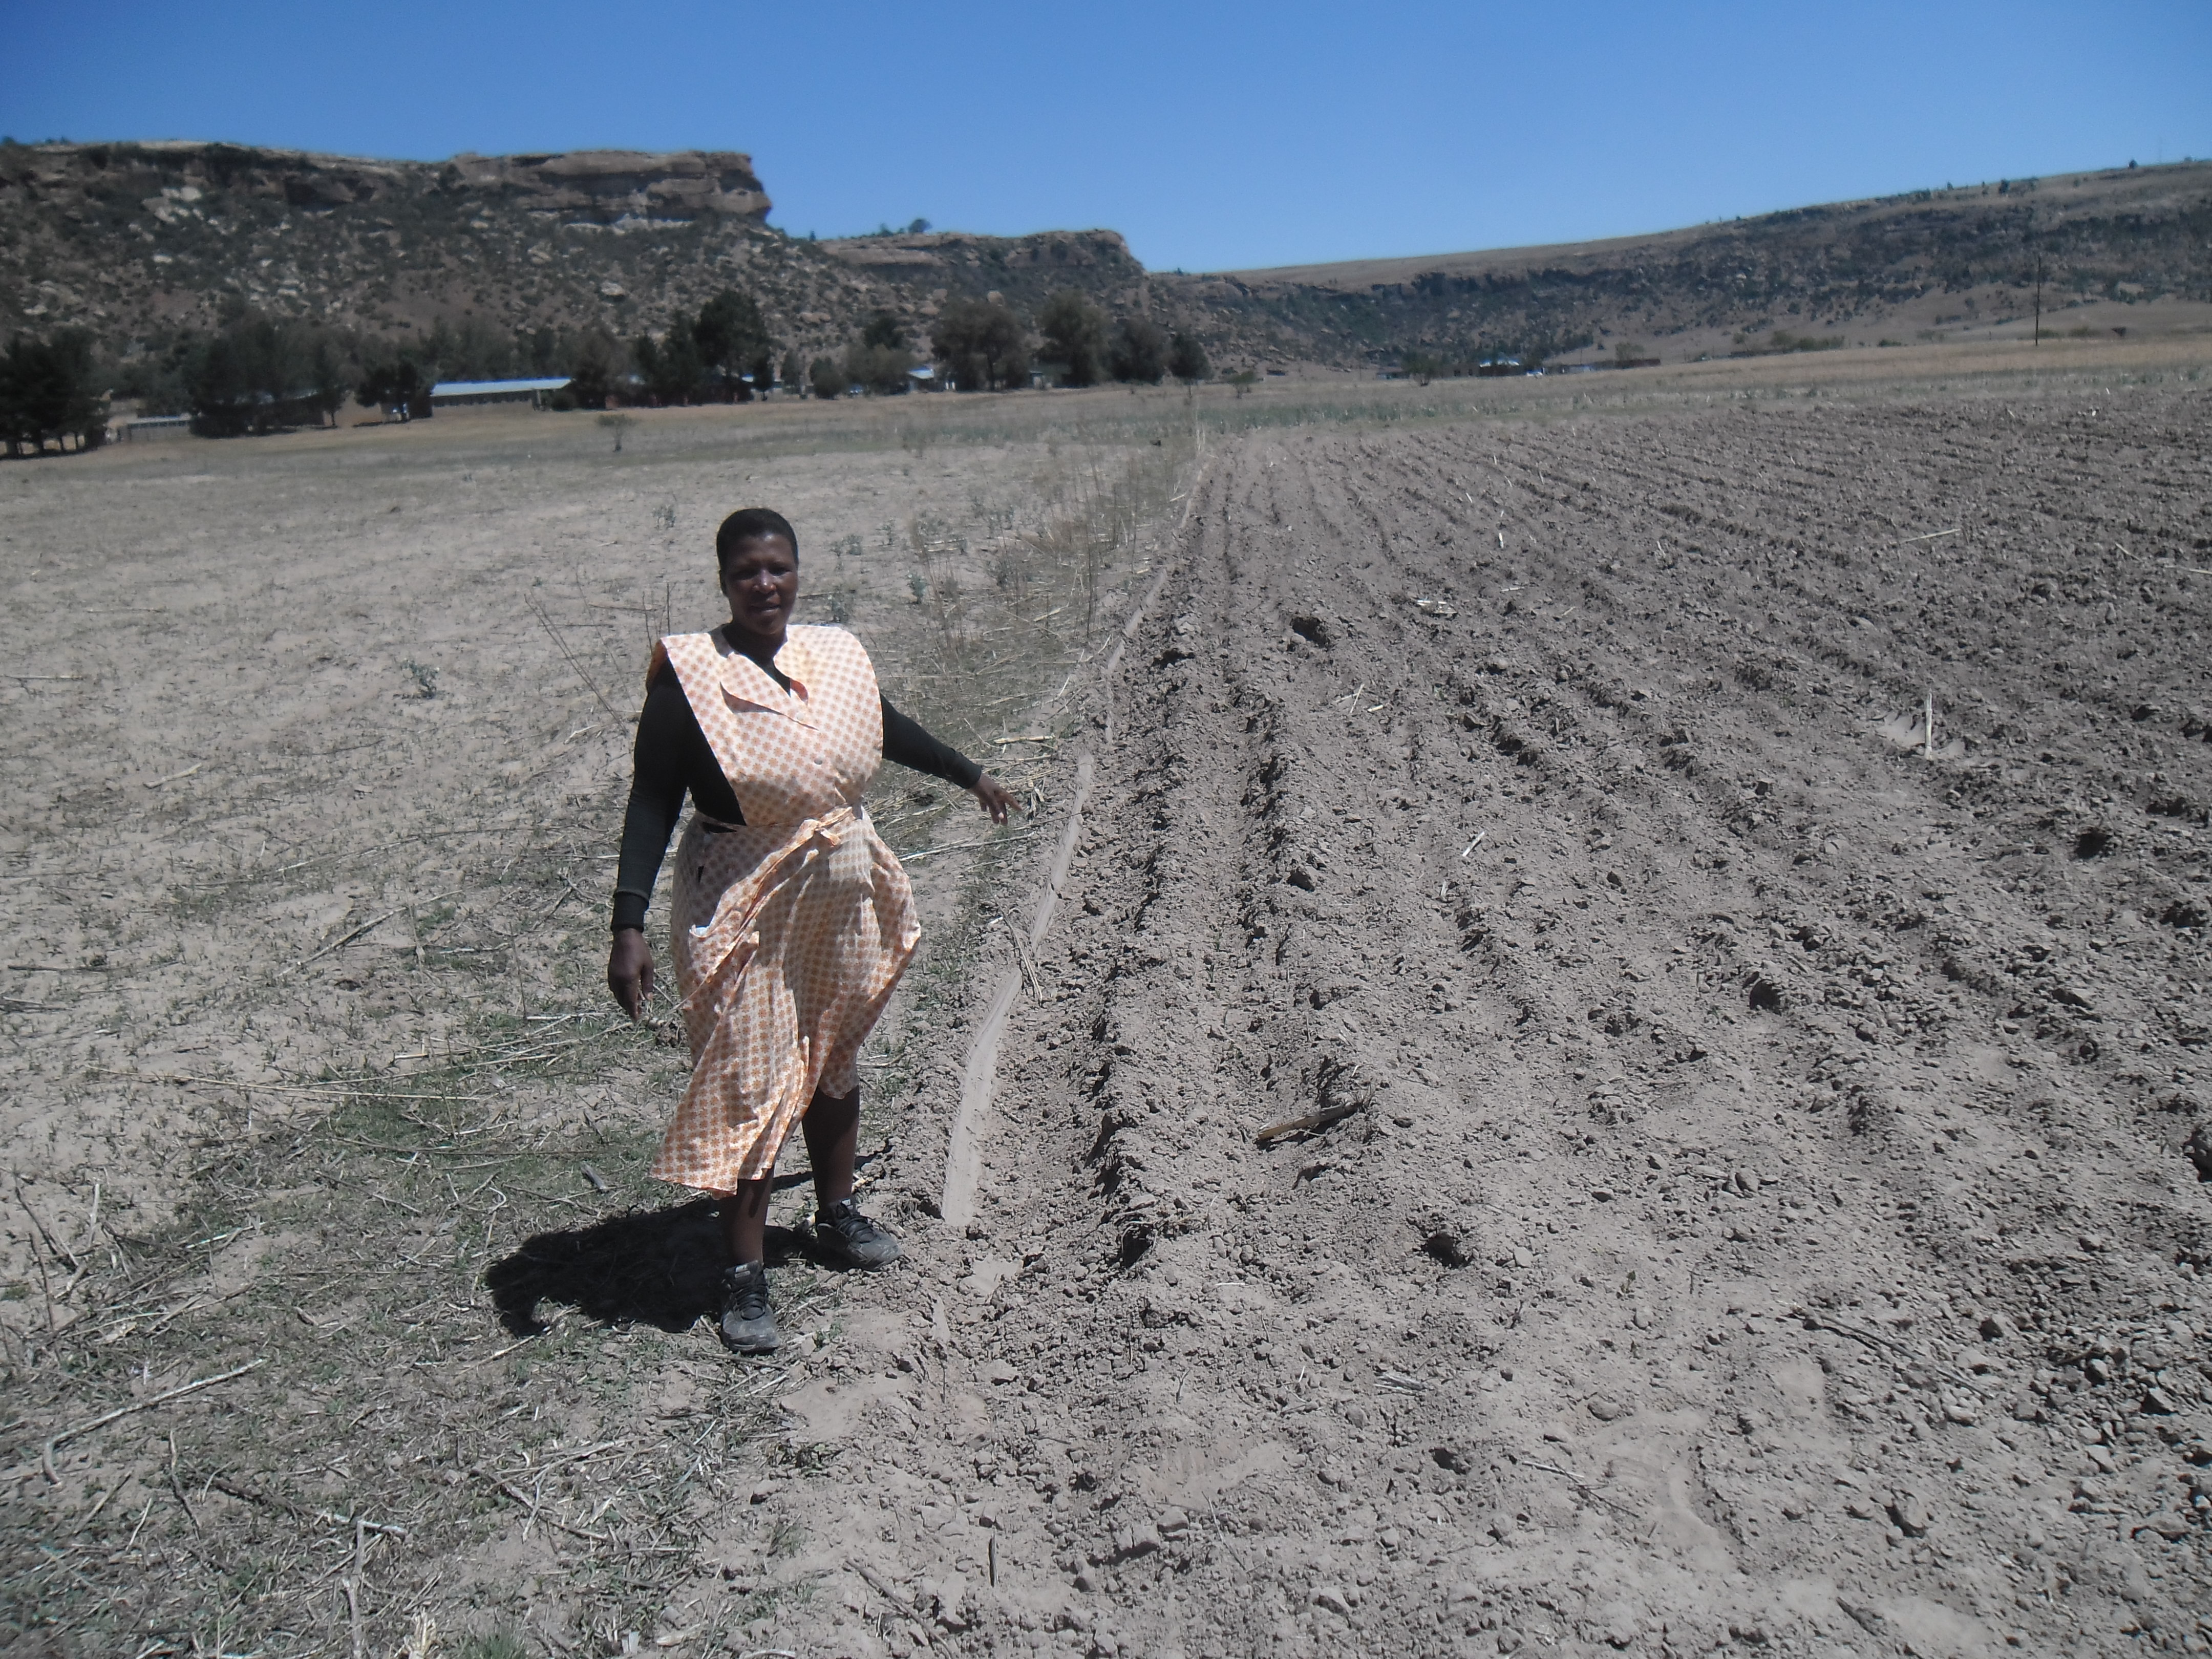  A farmer showing a drought affected field in Lesotho. Photo used with permission from Send a Cow.